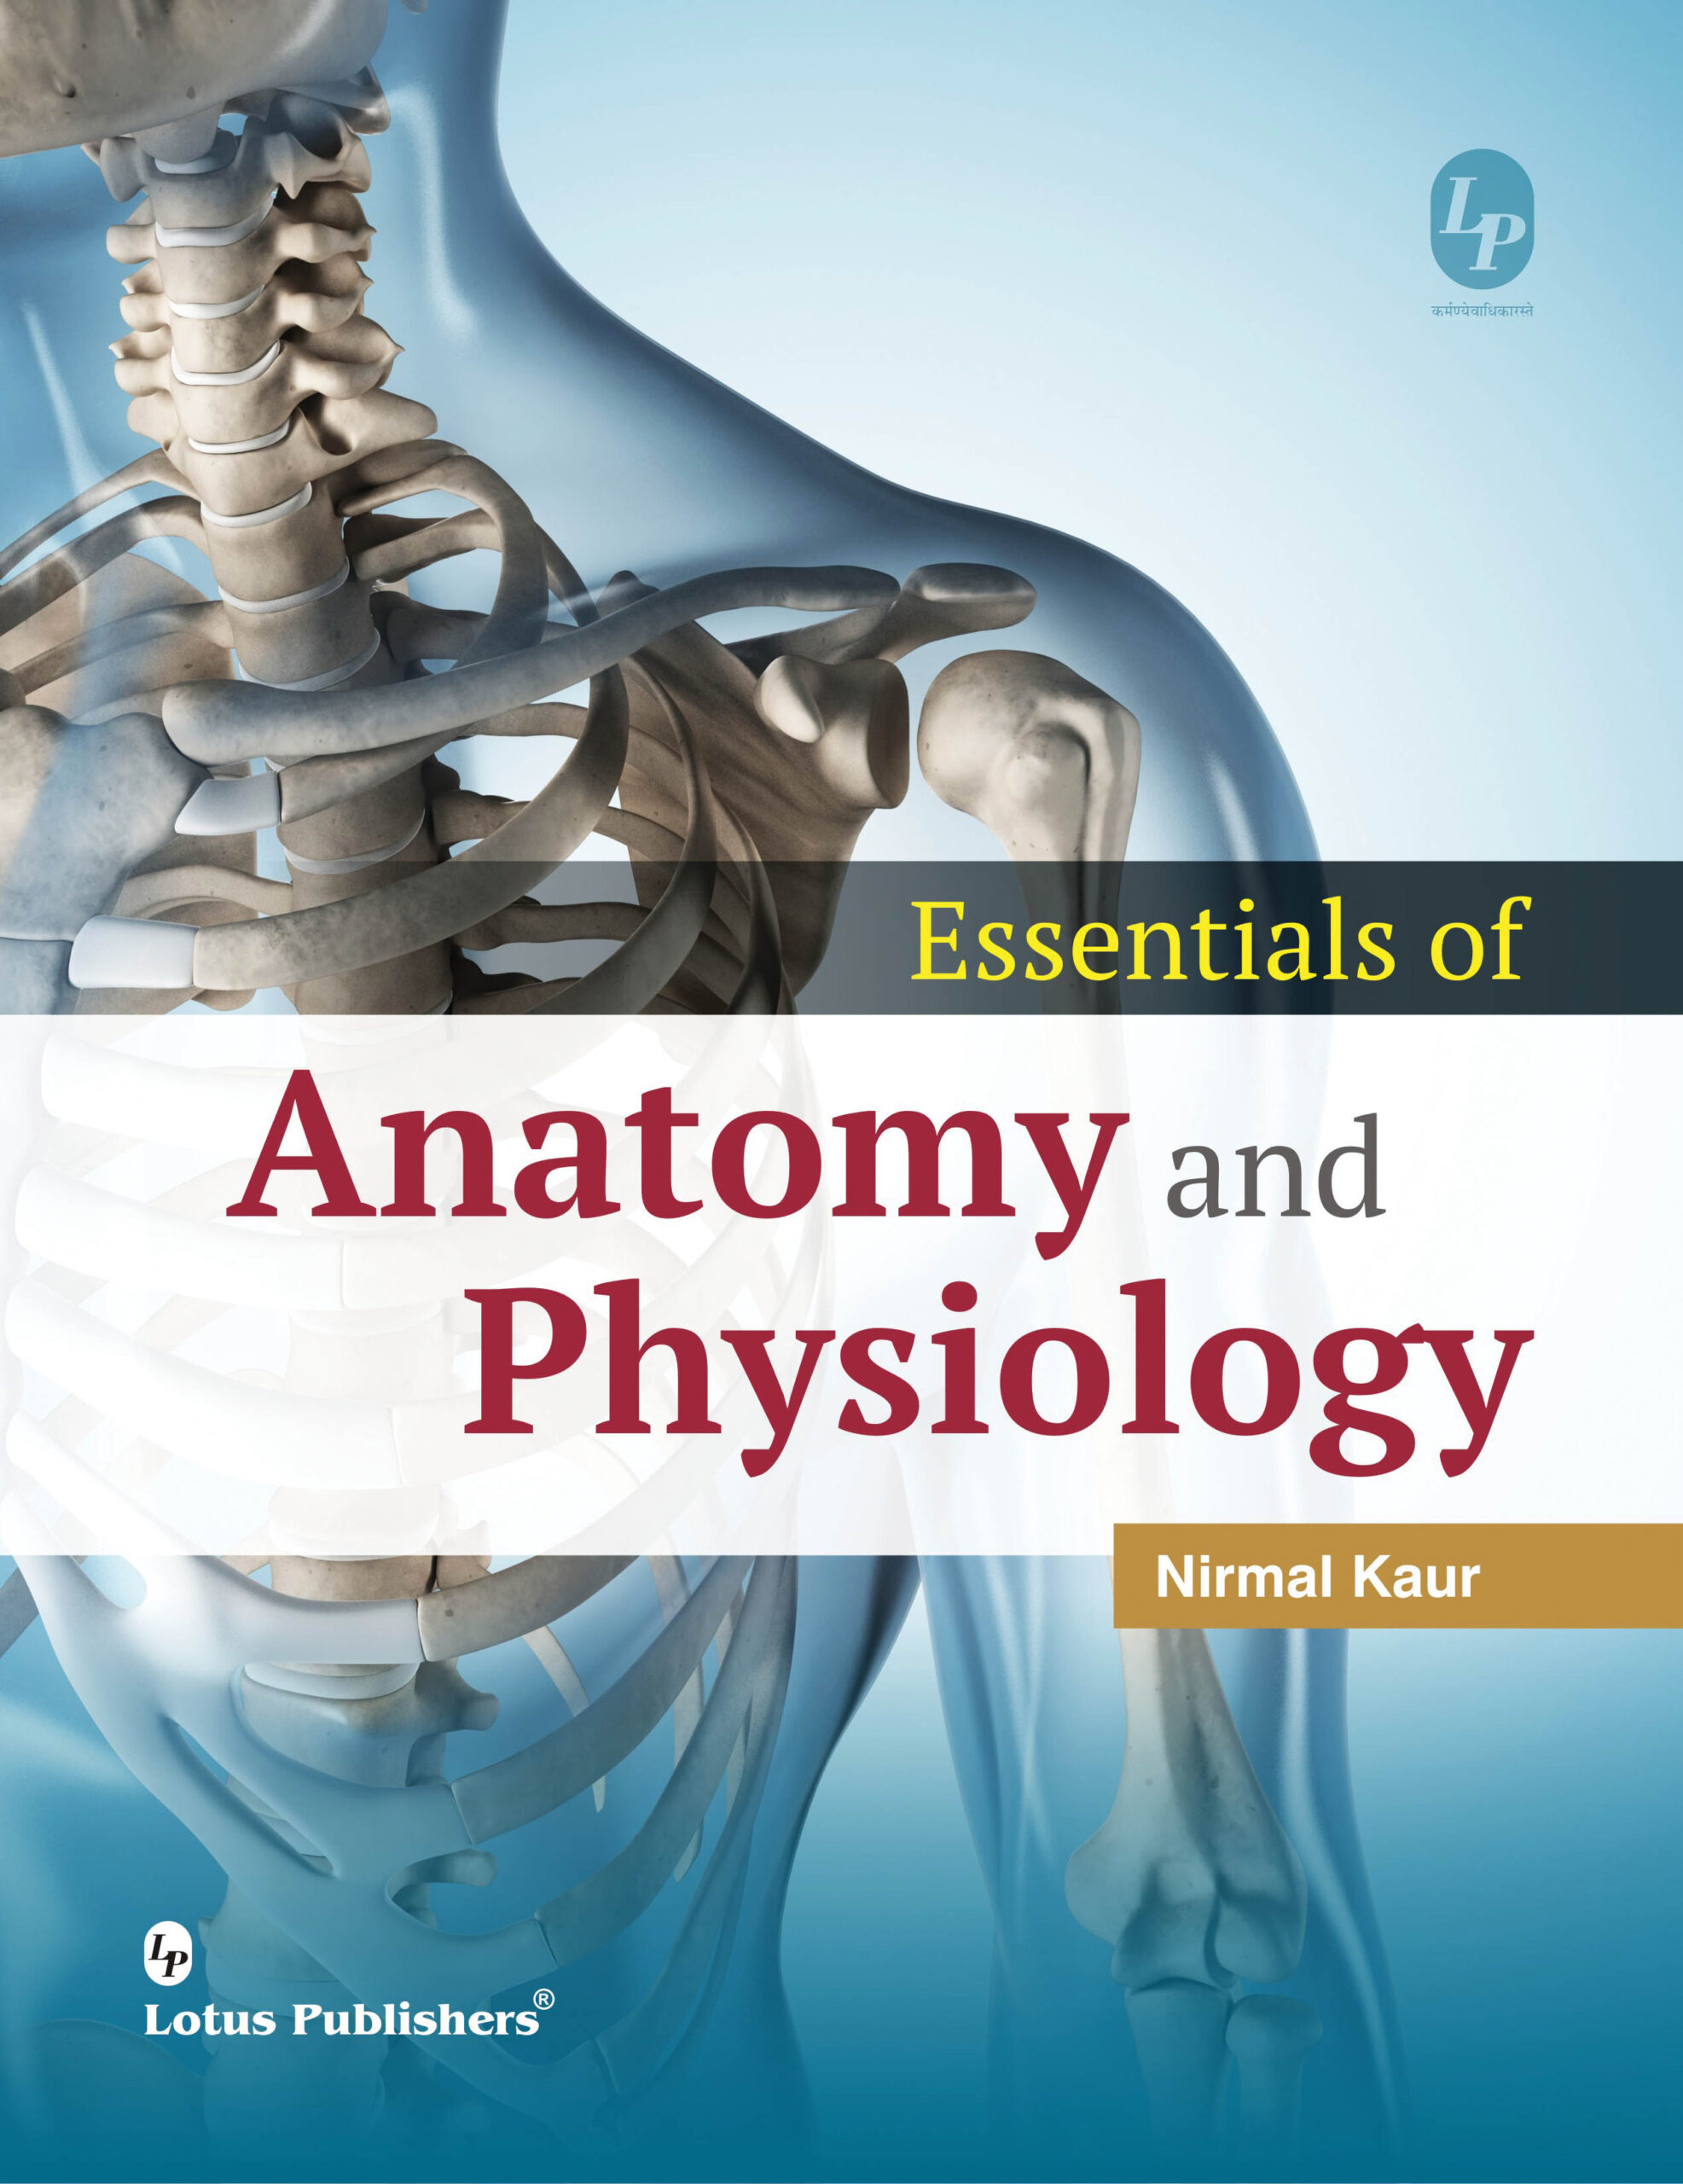 Essentials　And　Lotus　Physiology　Publishers　Of　Anatomy